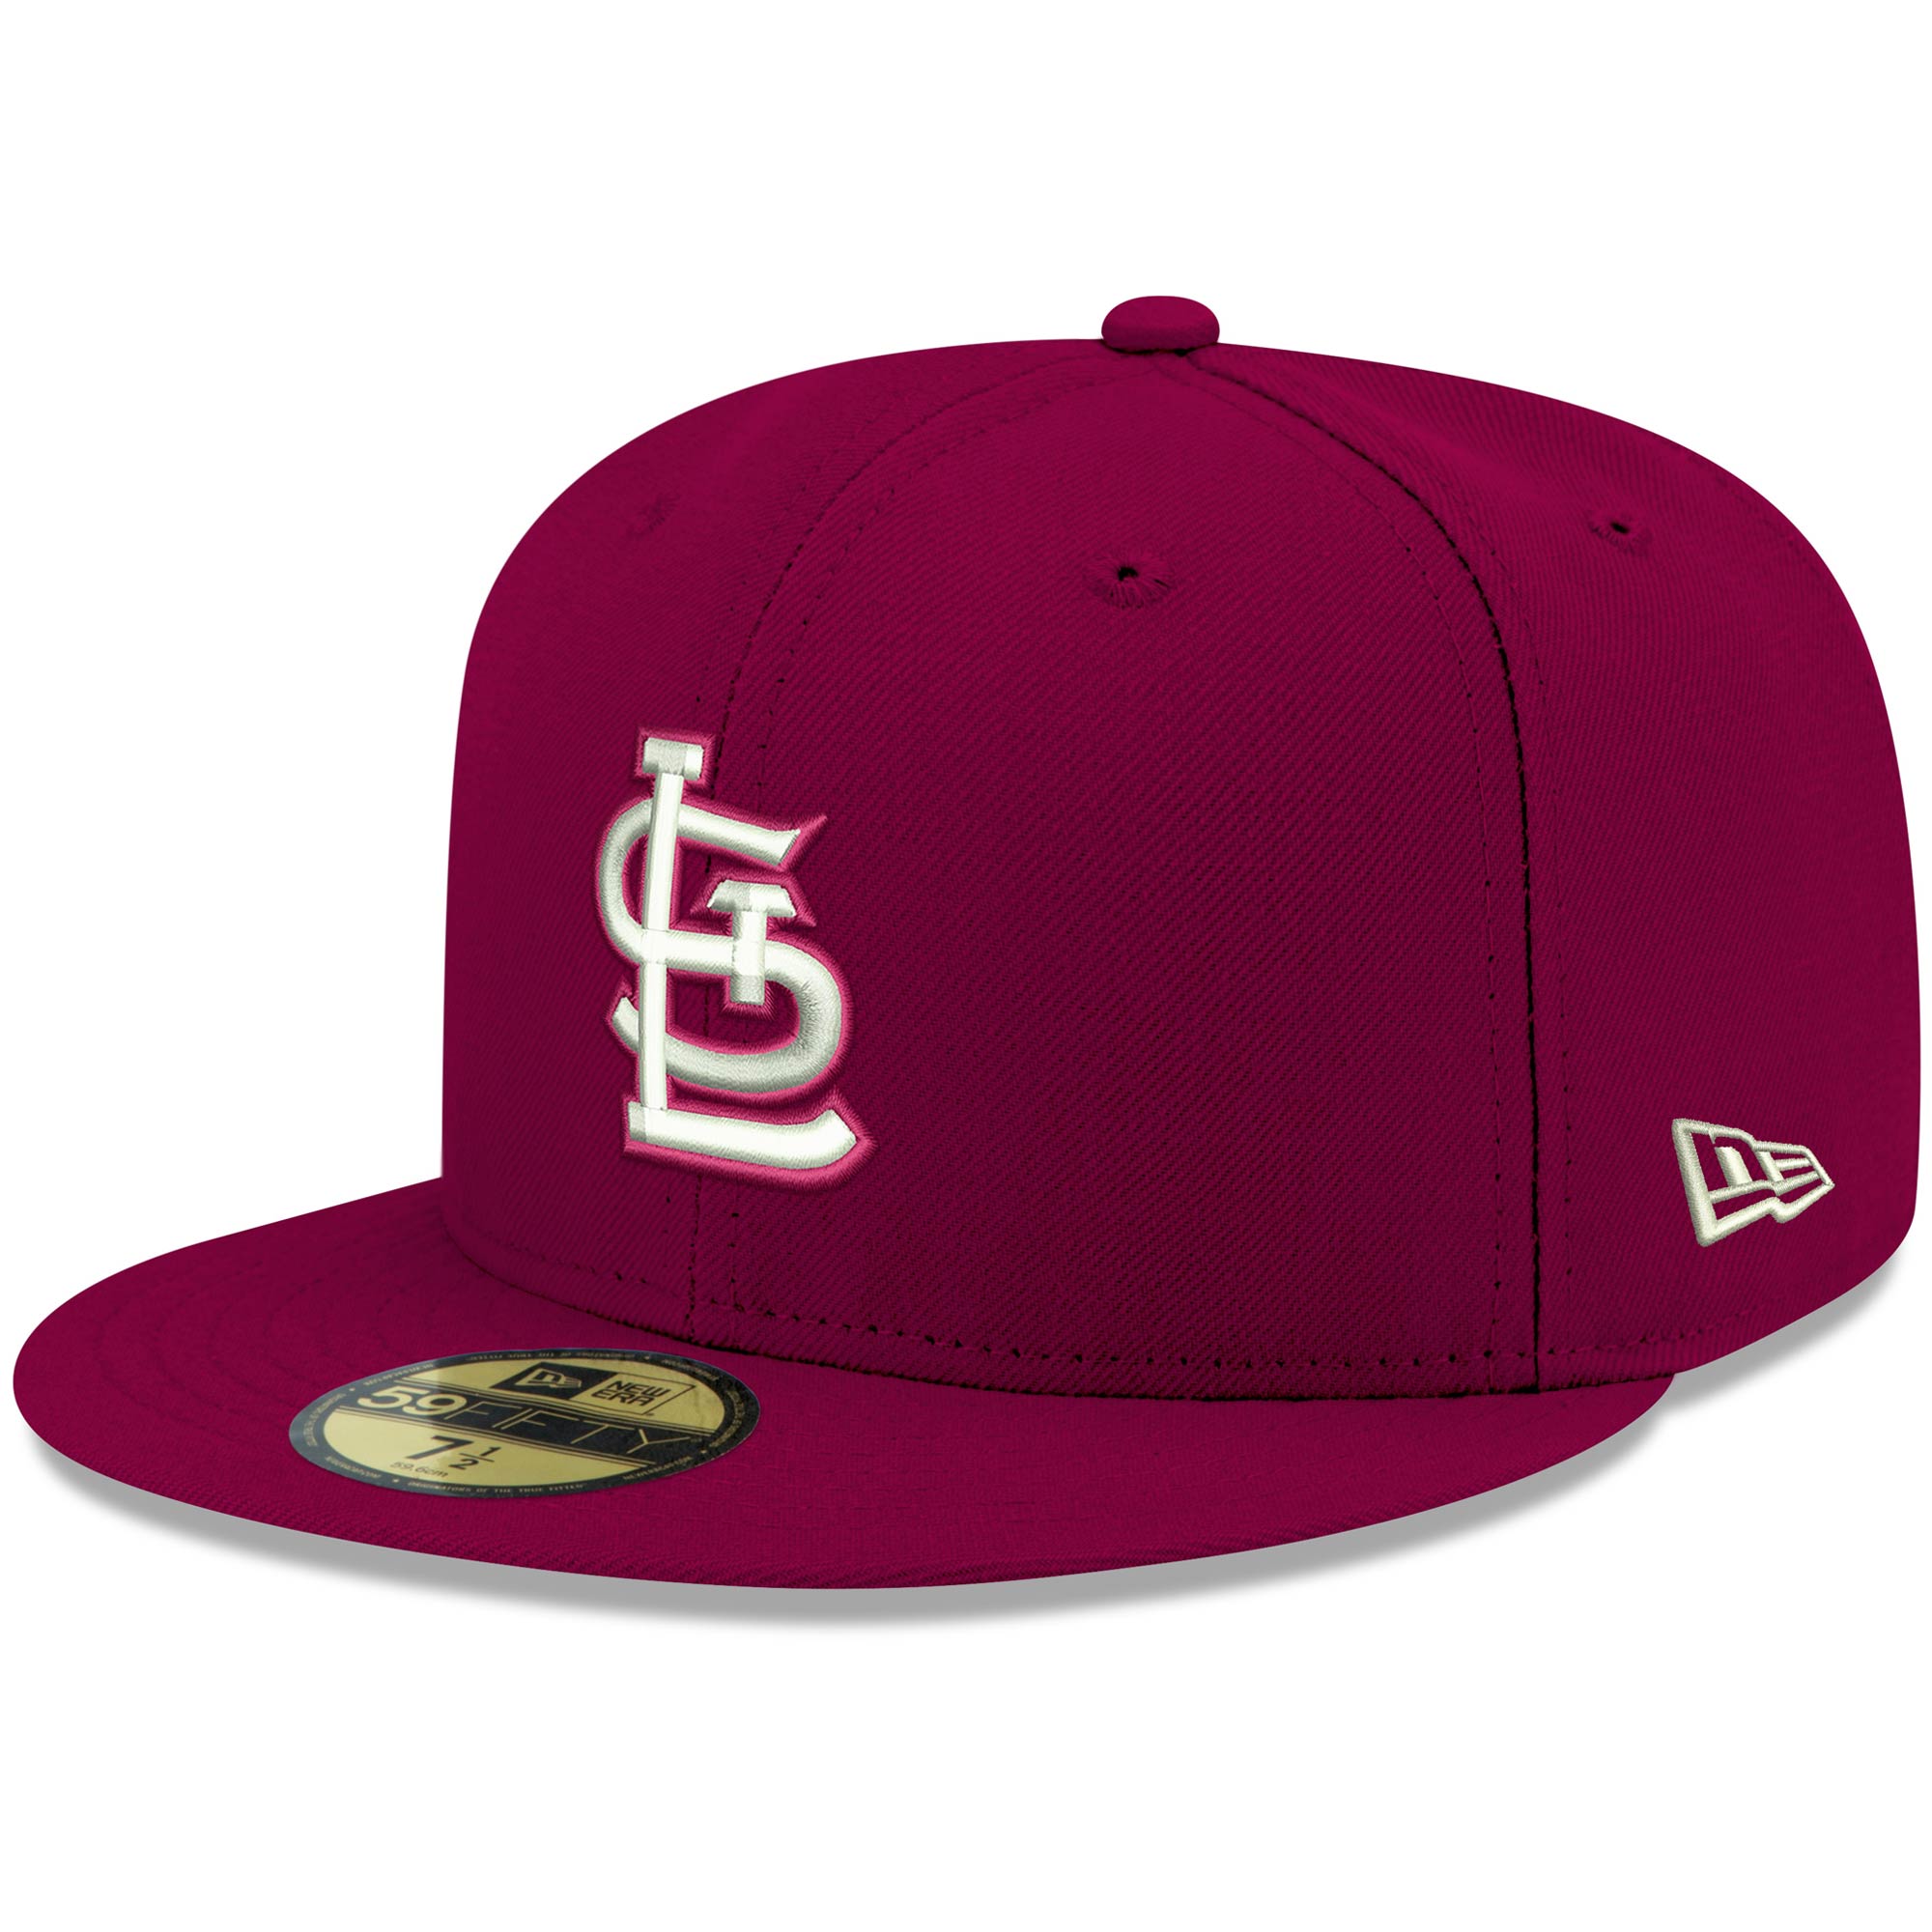 Men's New Era Cardinal St. Louis Cardinals White Logo 59FIFTY Fitted Hat - image 1 of 5